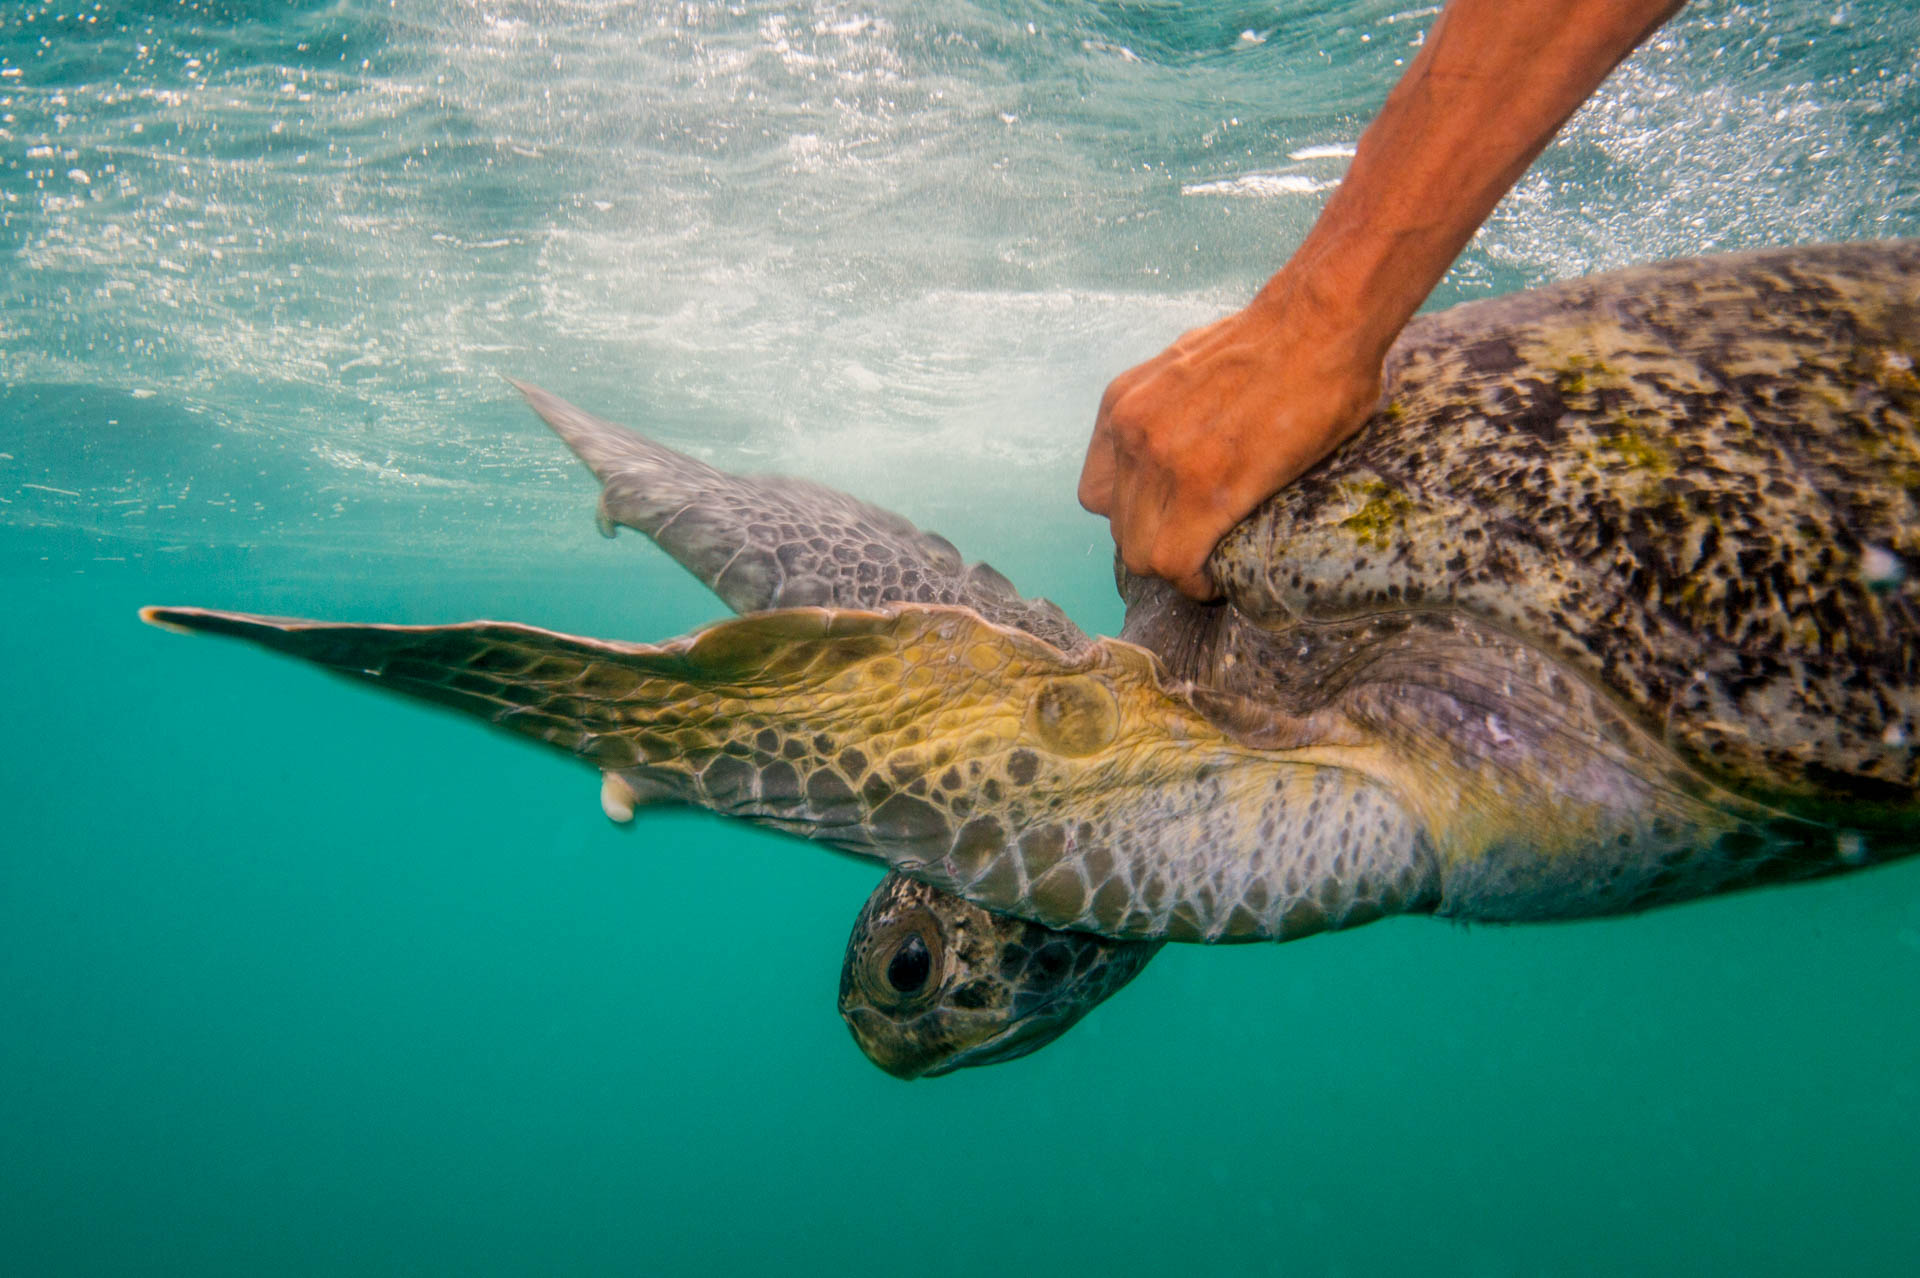 Black Sea Turtle, Chelonia mydas agassizi, being released after a health assessment by researchers in Baja California Sur, Mexico.